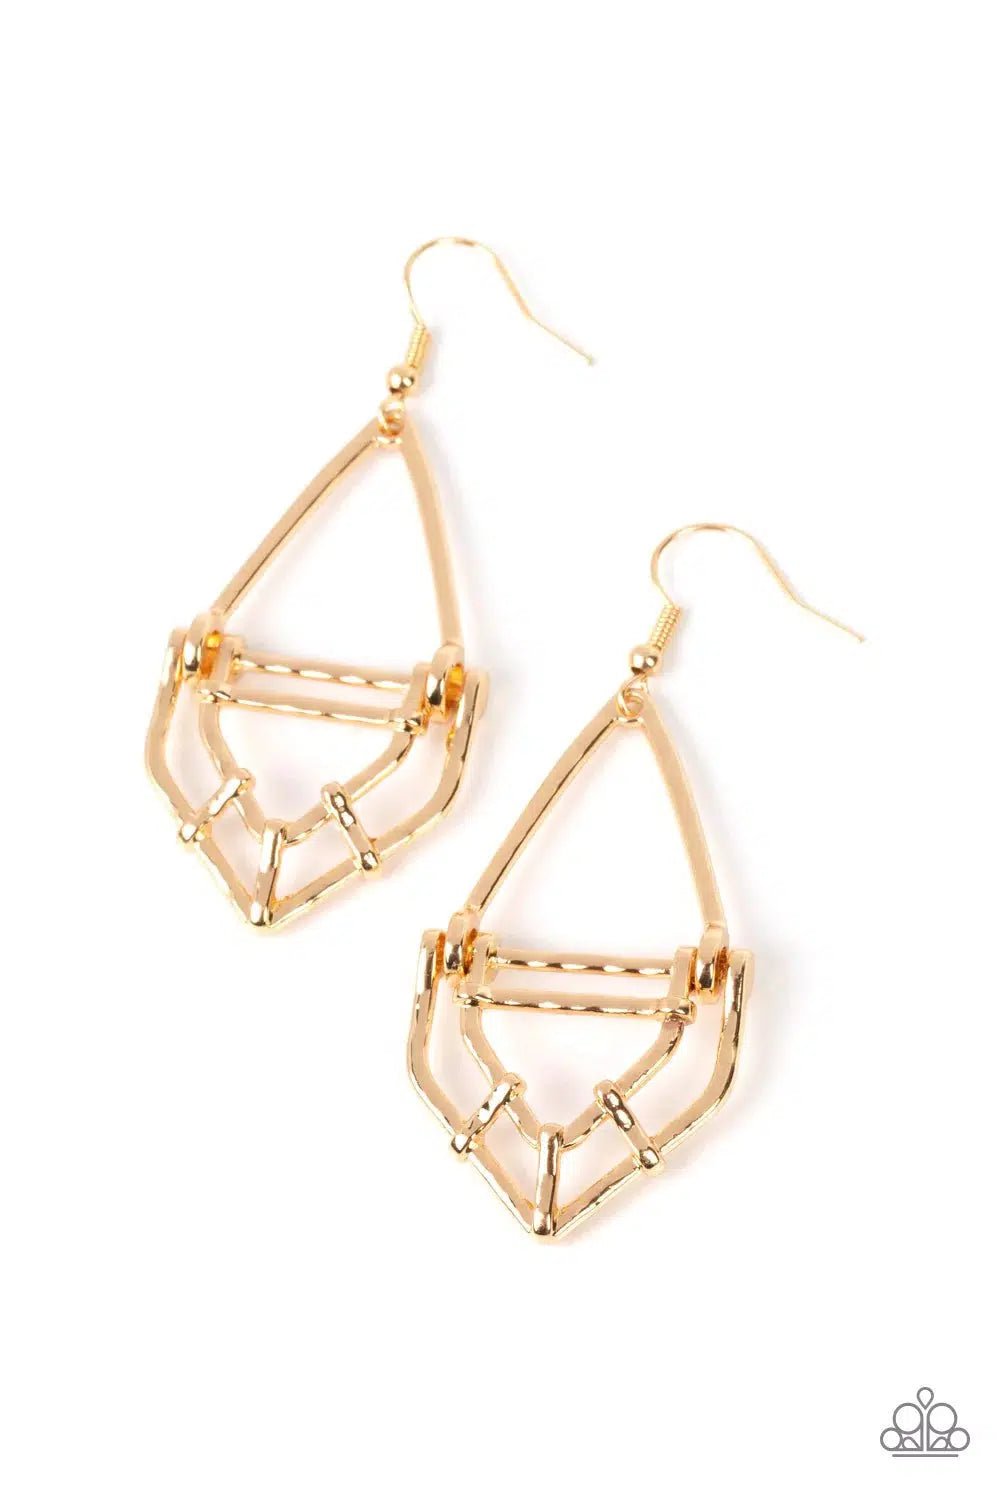 Artisan Apparatus Gold Earrings - Paparazzi Accessories- lightbox - CarasShop.com - $5 Jewelry by Cara Jewels